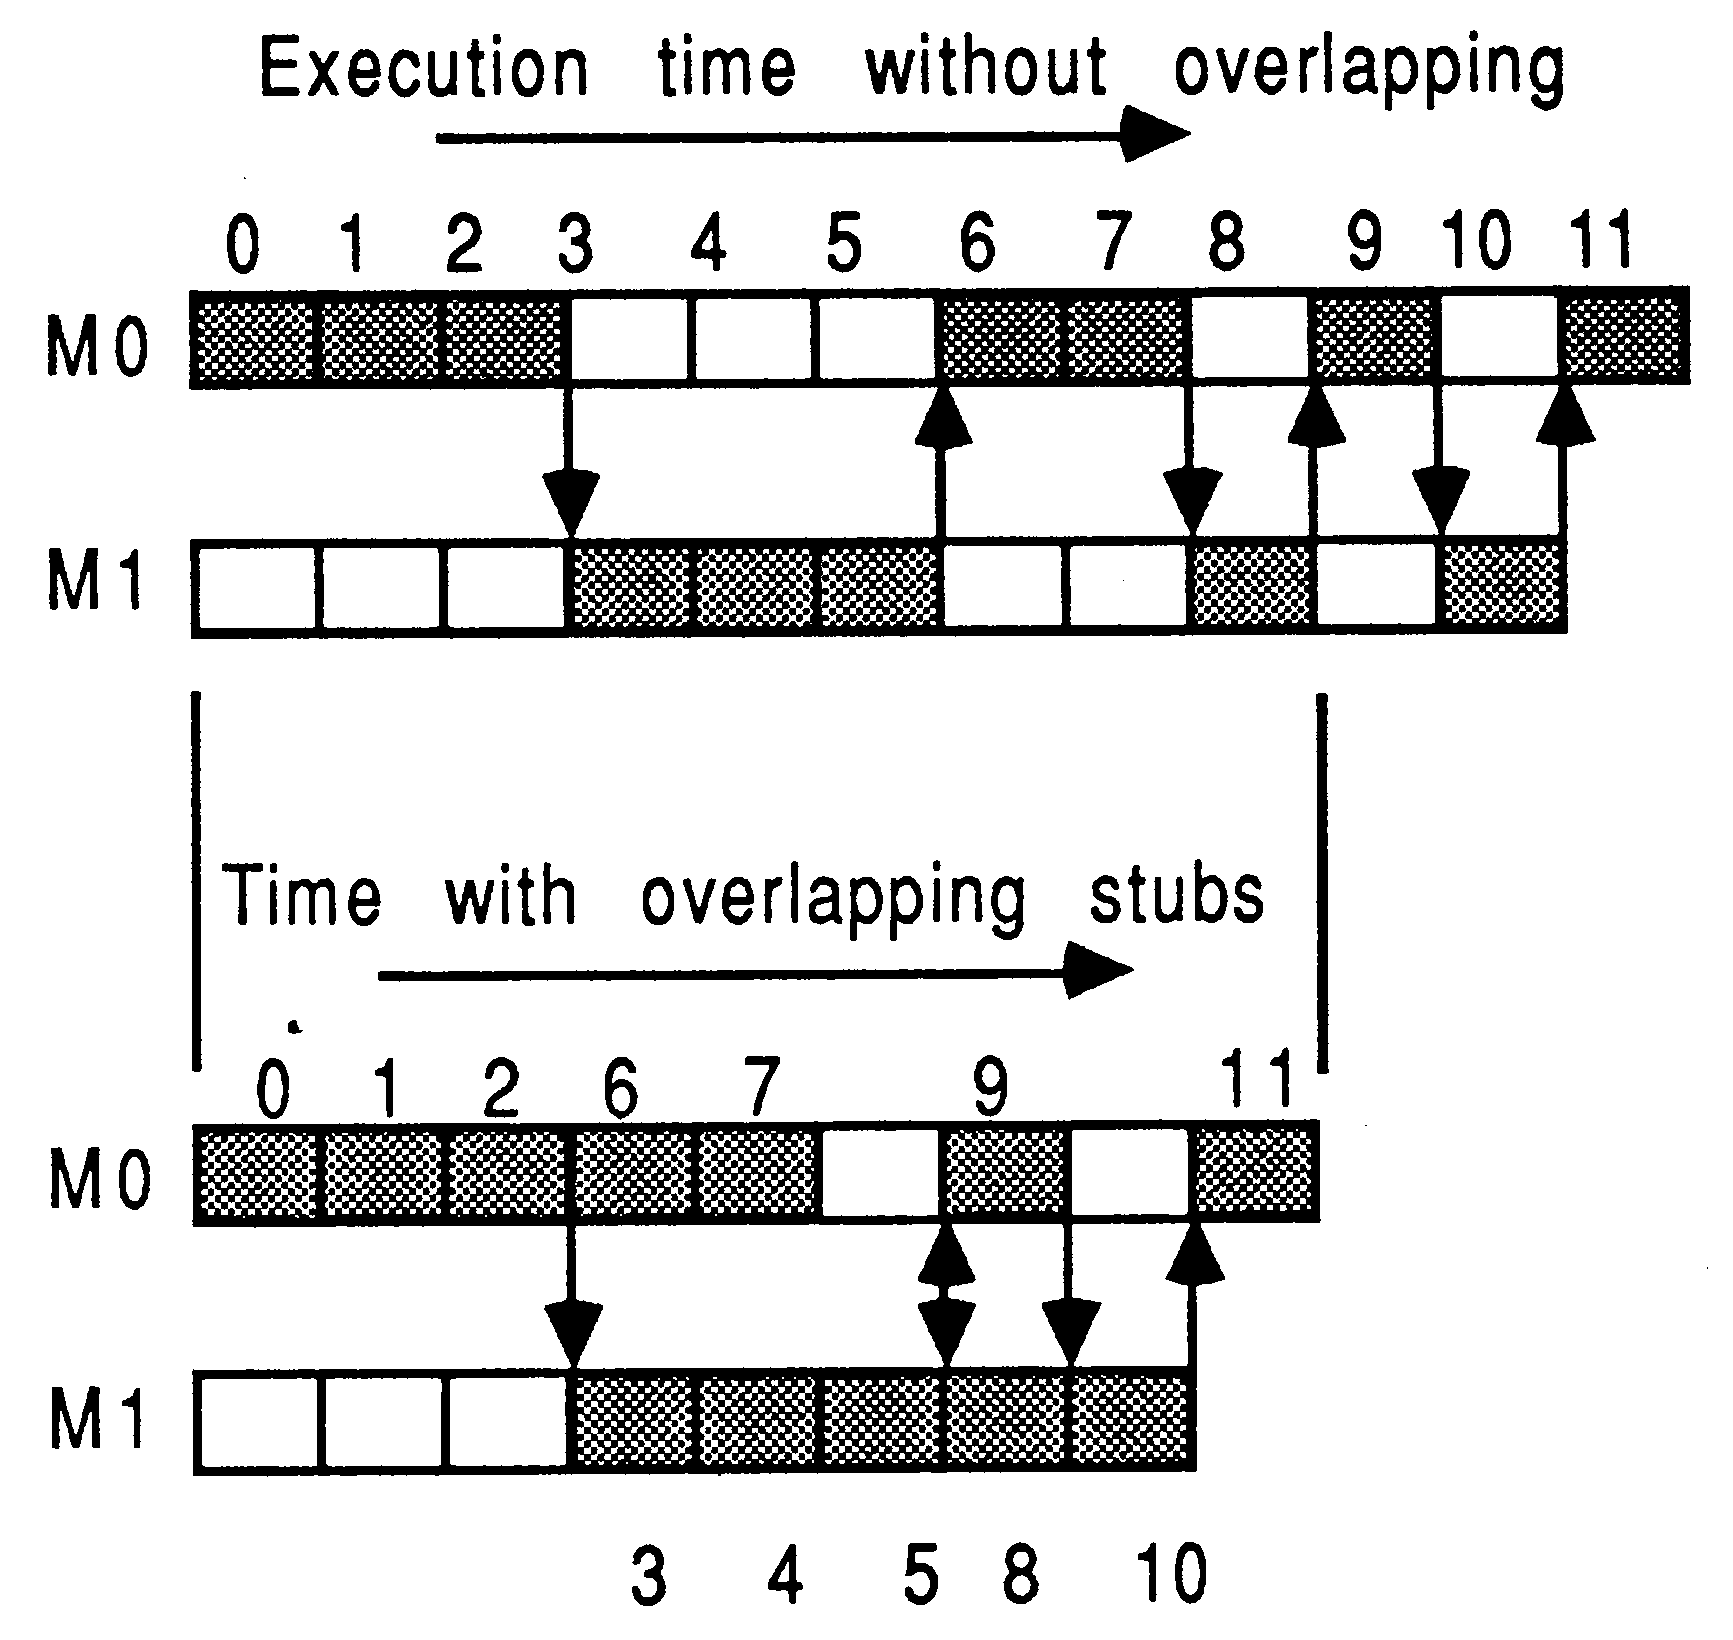 Overlapping
     execution using two stubs per module